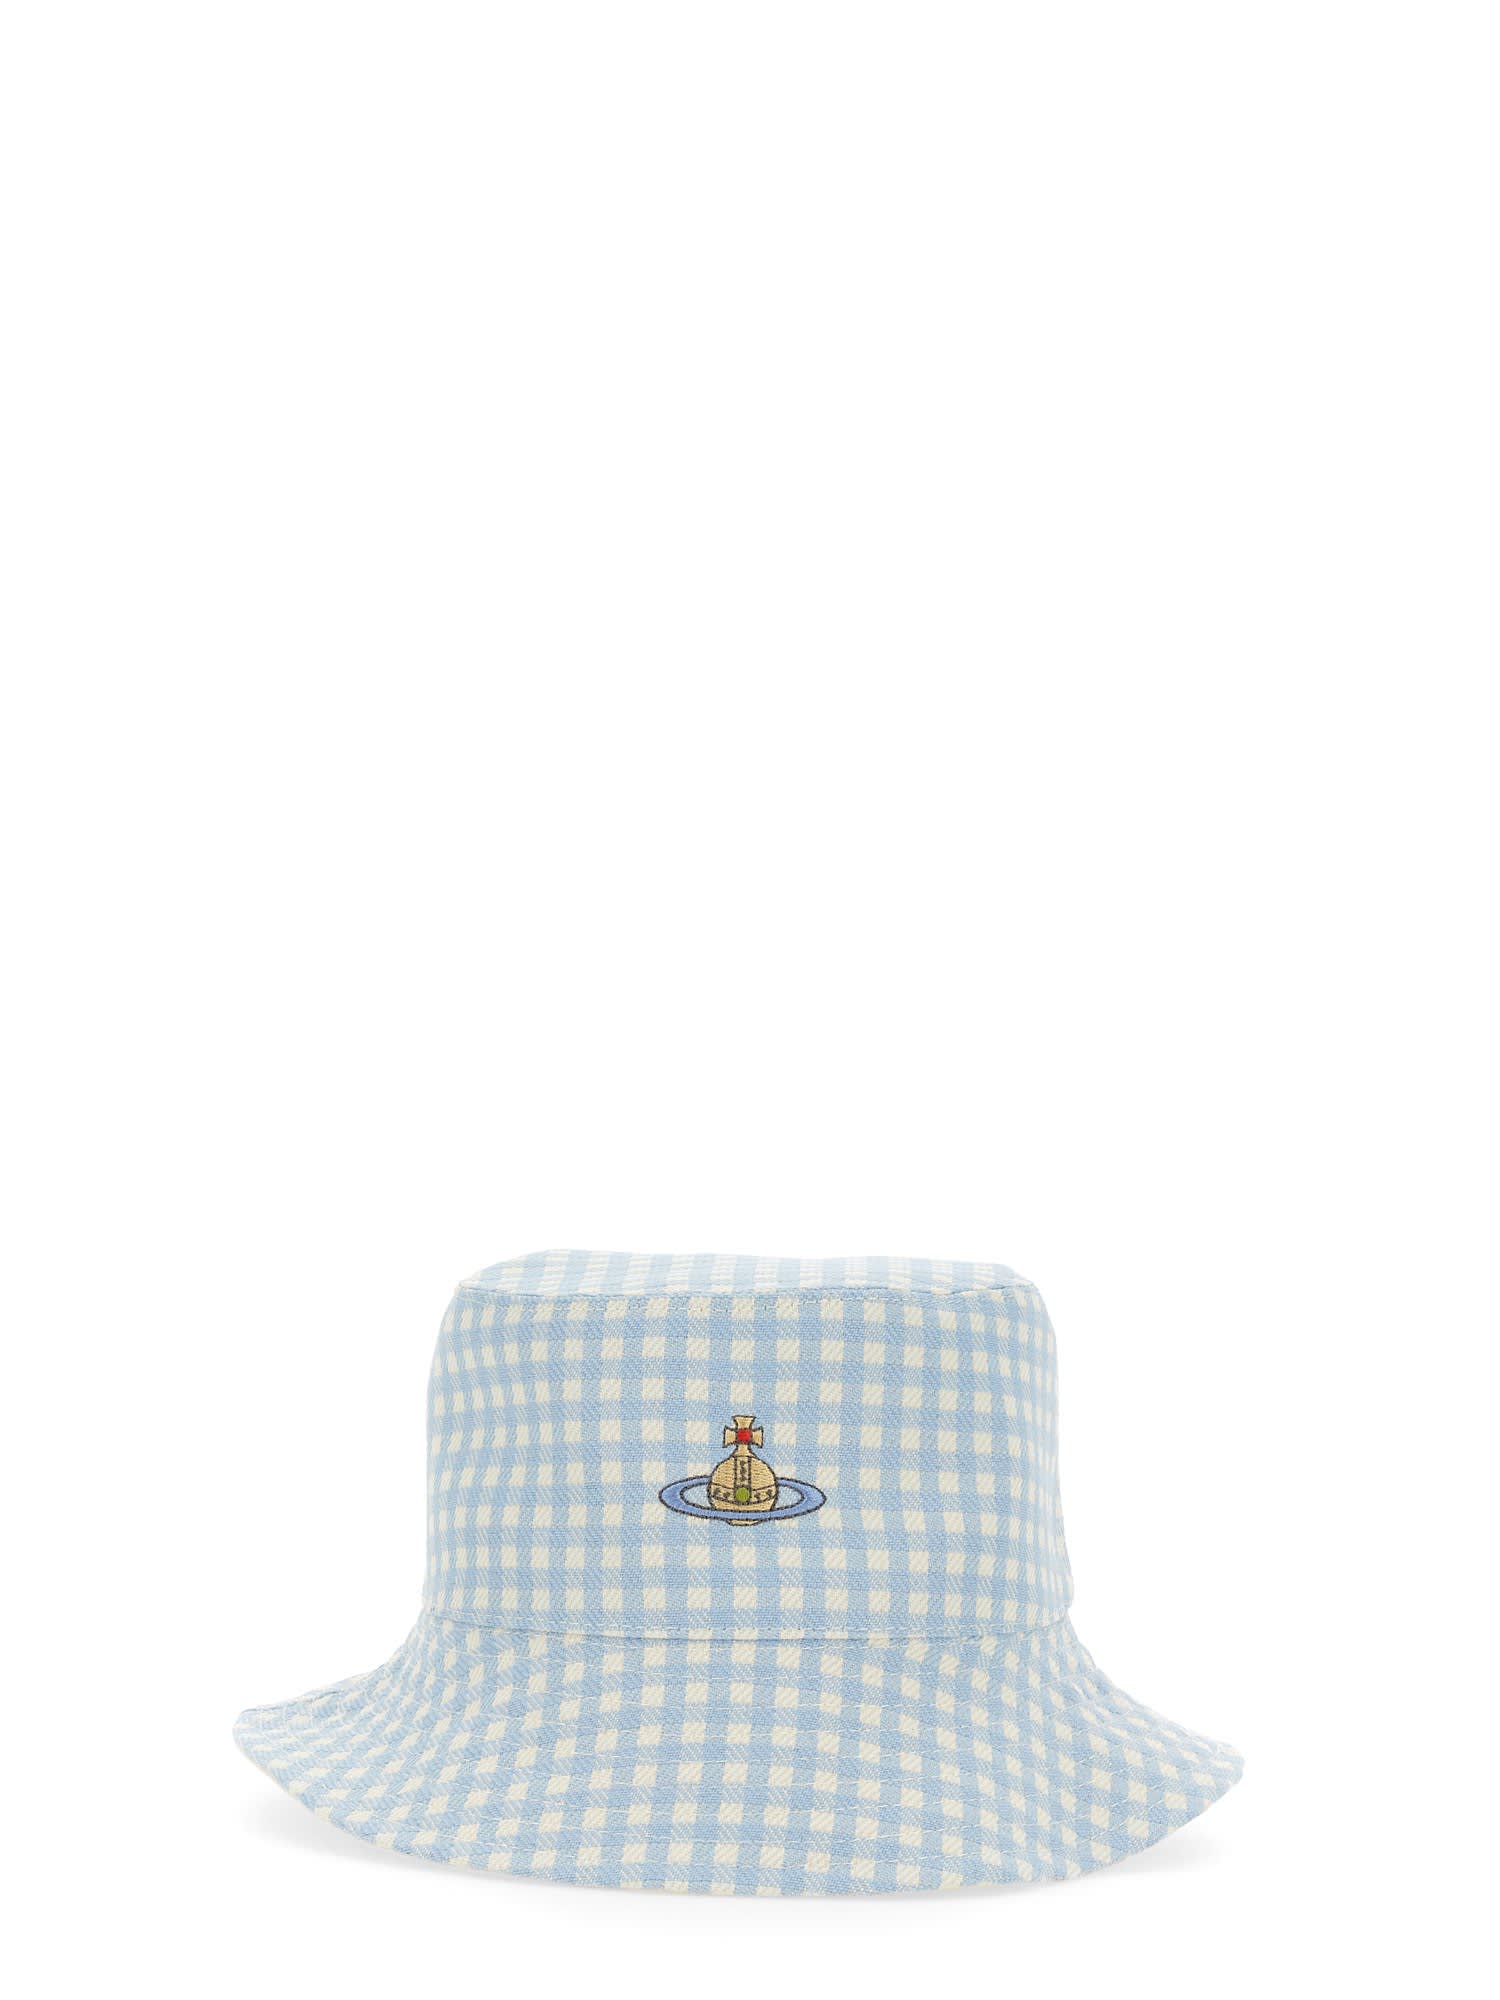 Vivienne Westwood Bucket Hat With Orb Embroidery